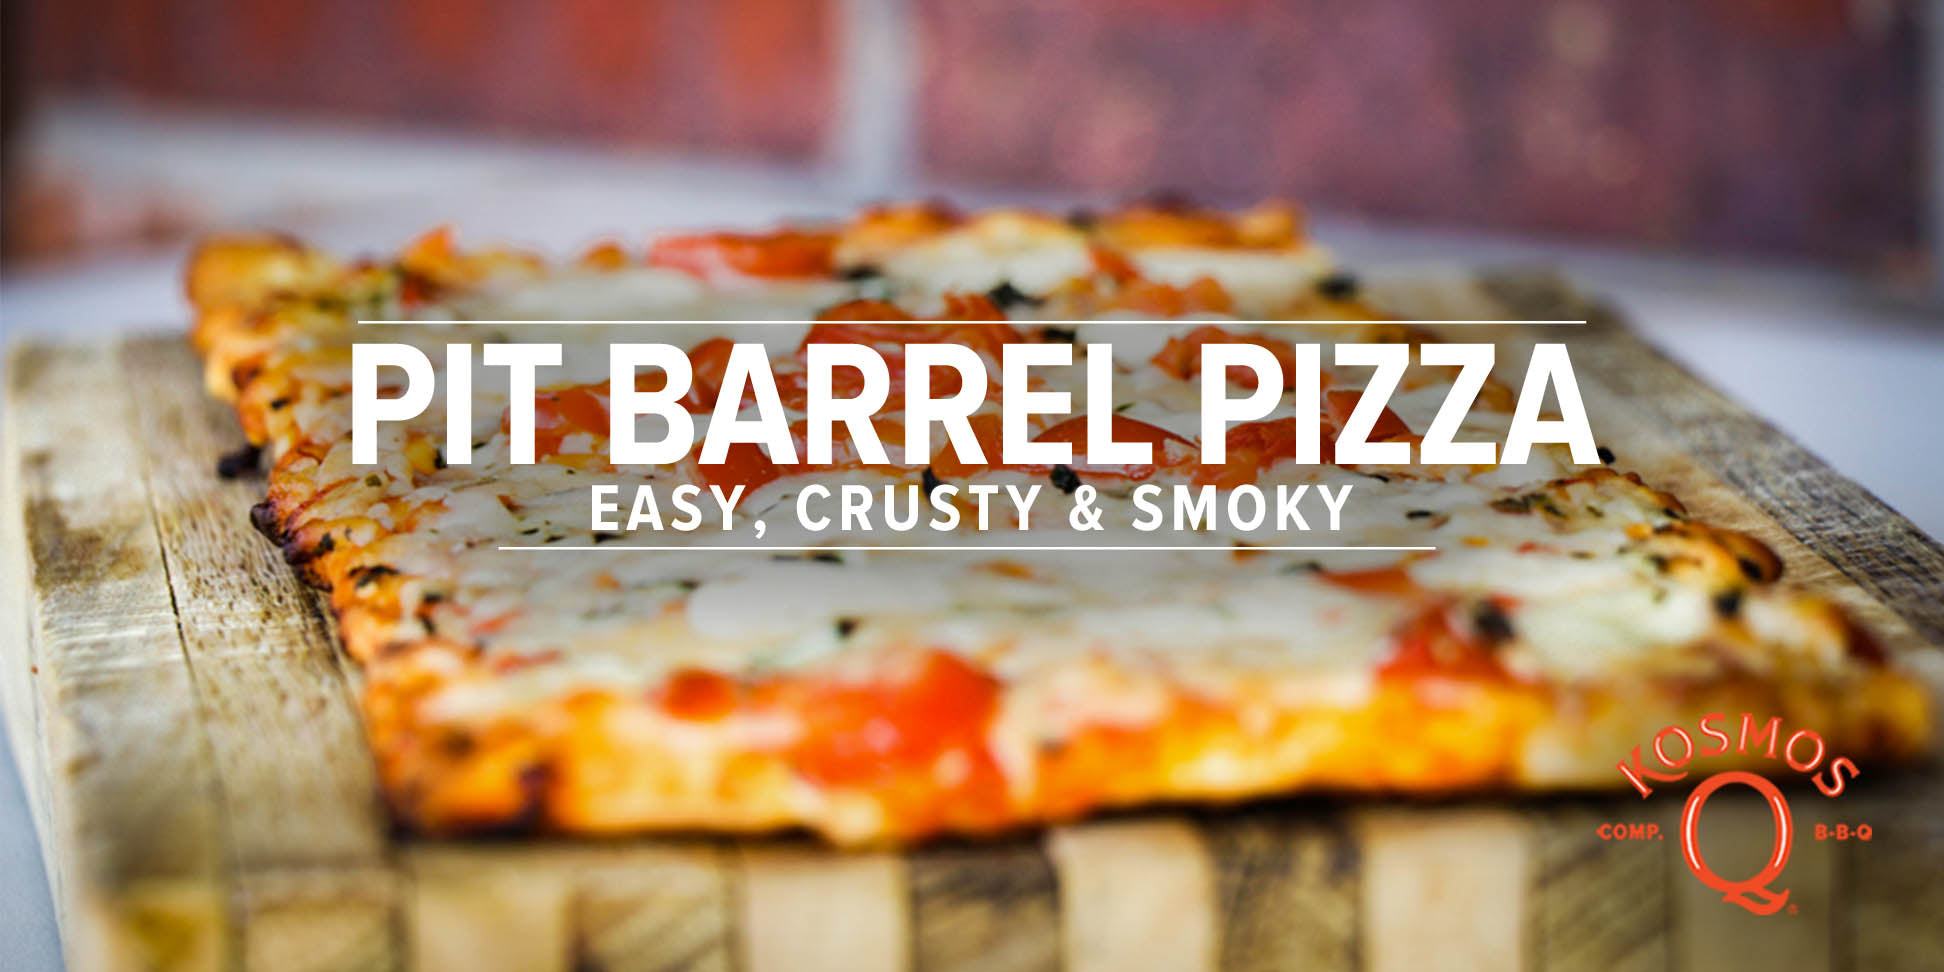 Barbecue Pizza on the Pit Barrel!